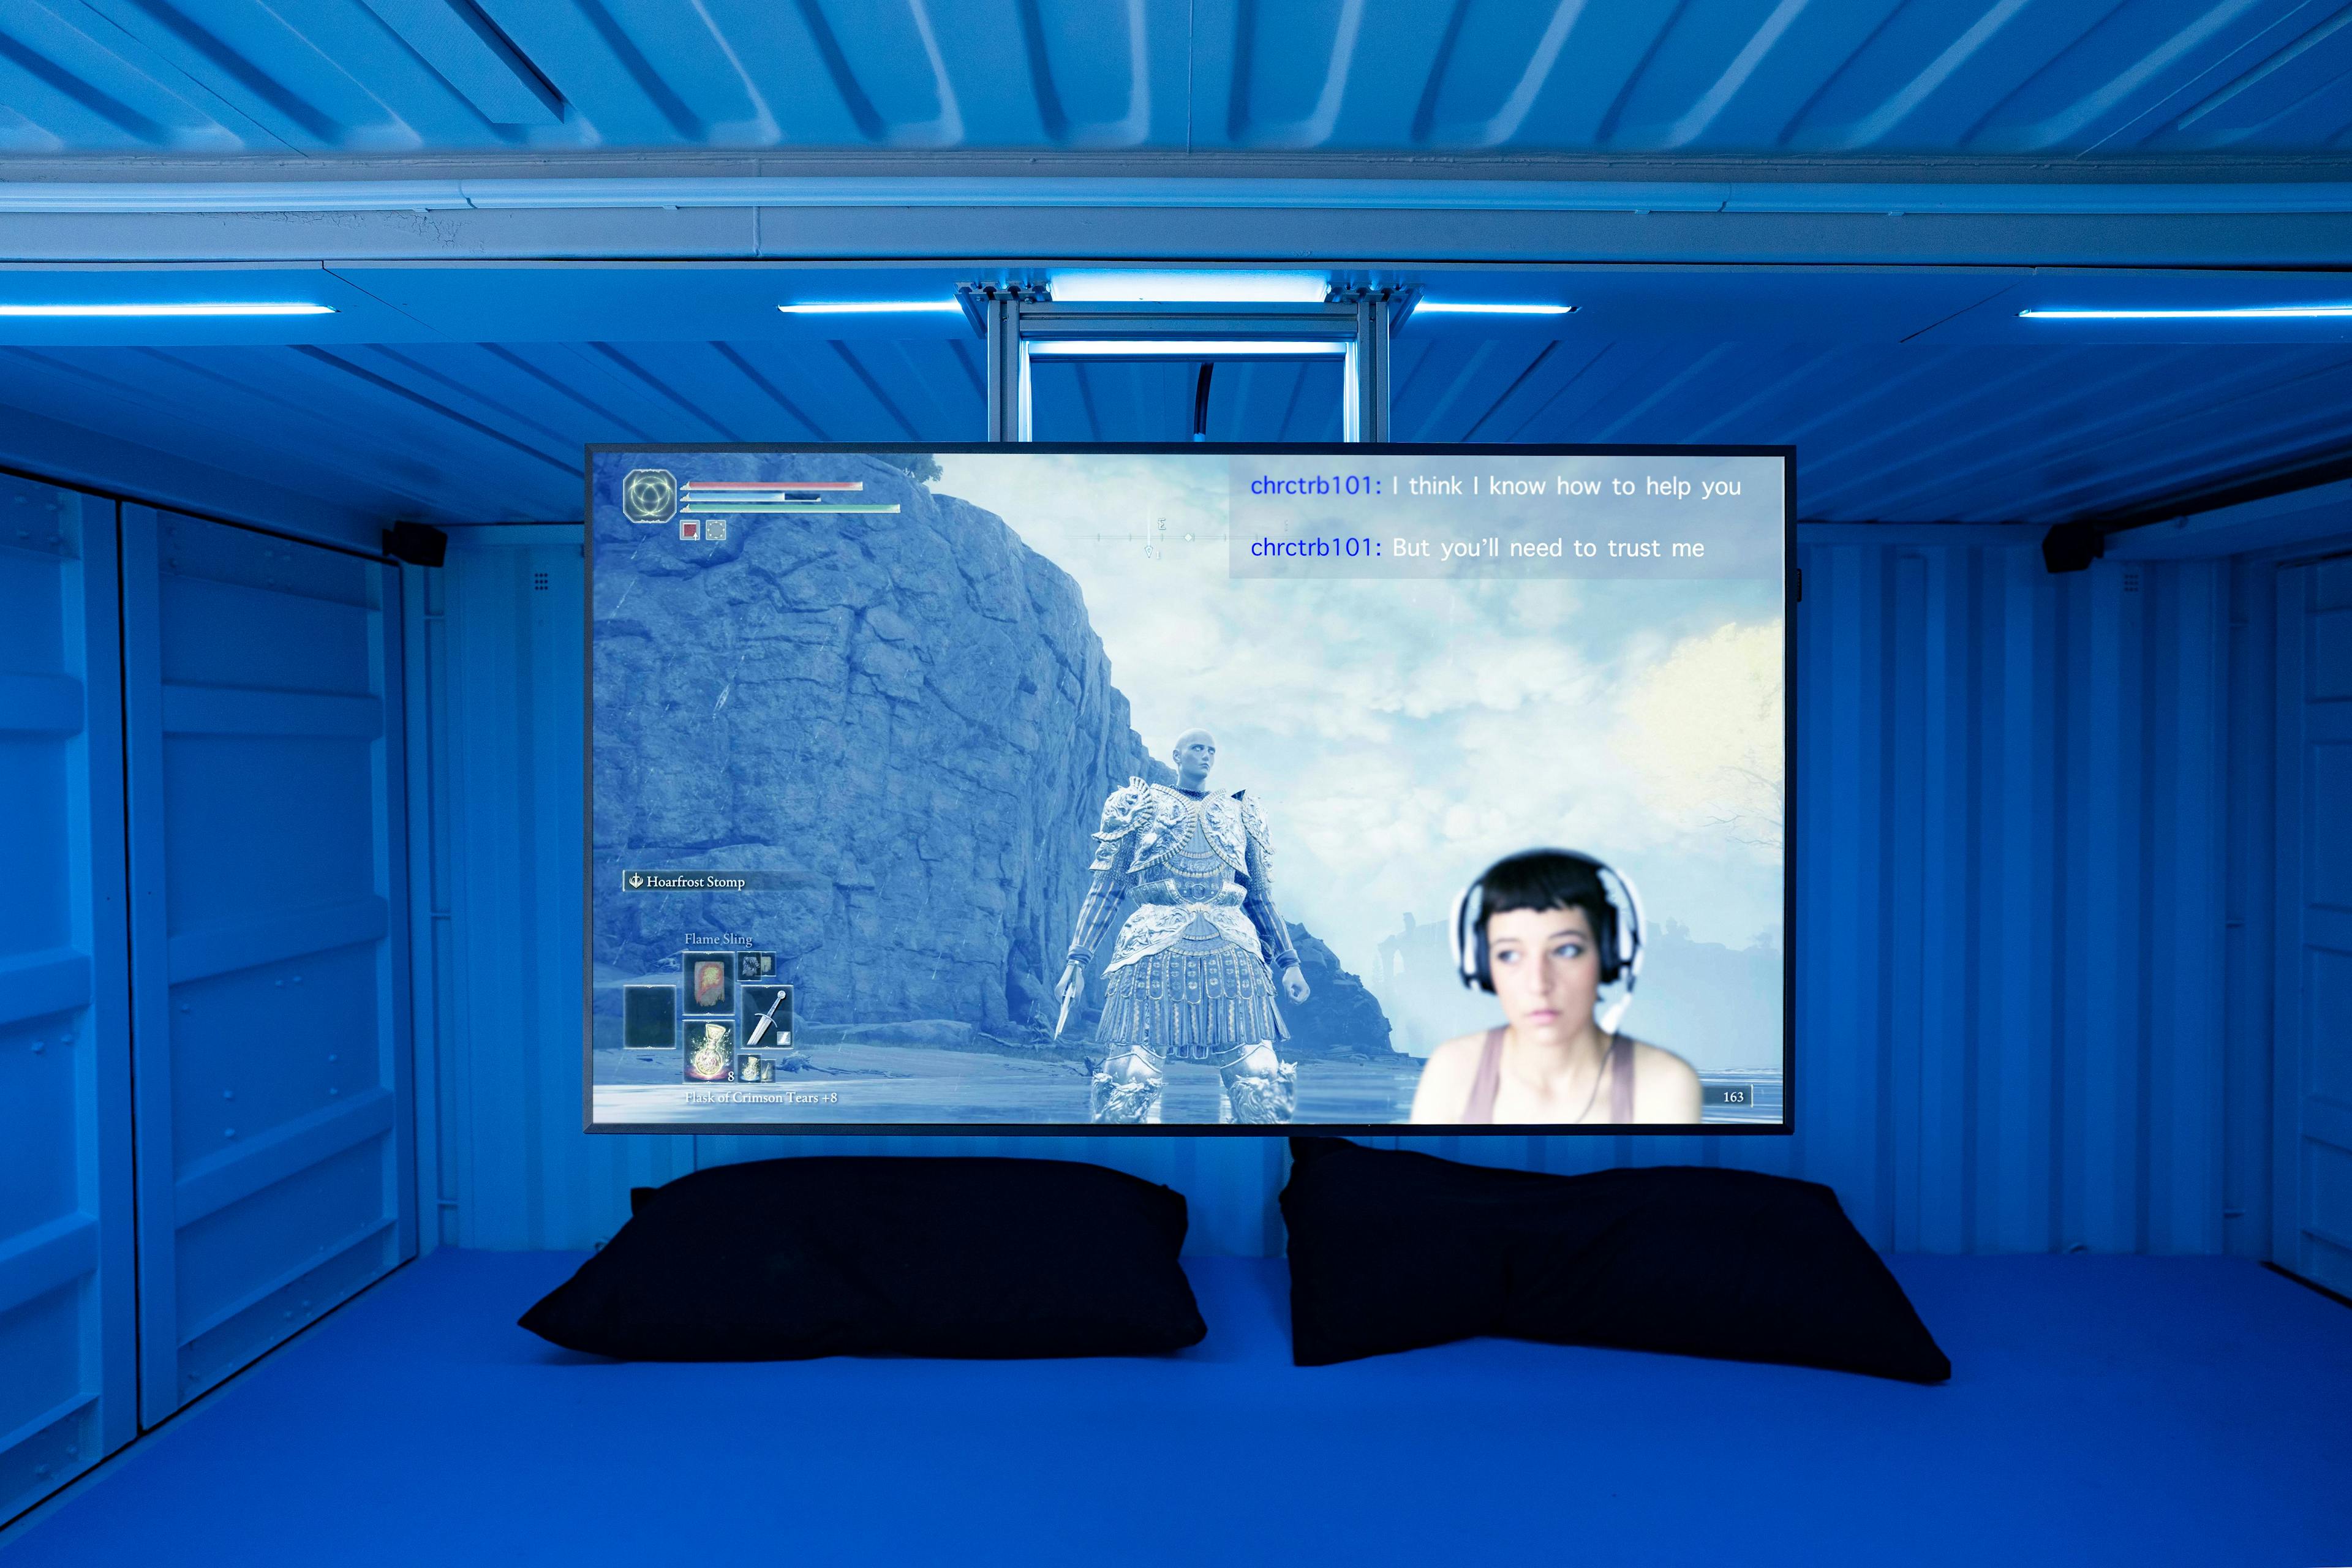 A ceiling-mounted monitor in a small blue room resembling a shipping container livestreams a video game. On the screen is an inset of a woman with a headset against a backdrop of a video game avatar in armor standing next to a large cliff. There are two dark pillows on the floor.